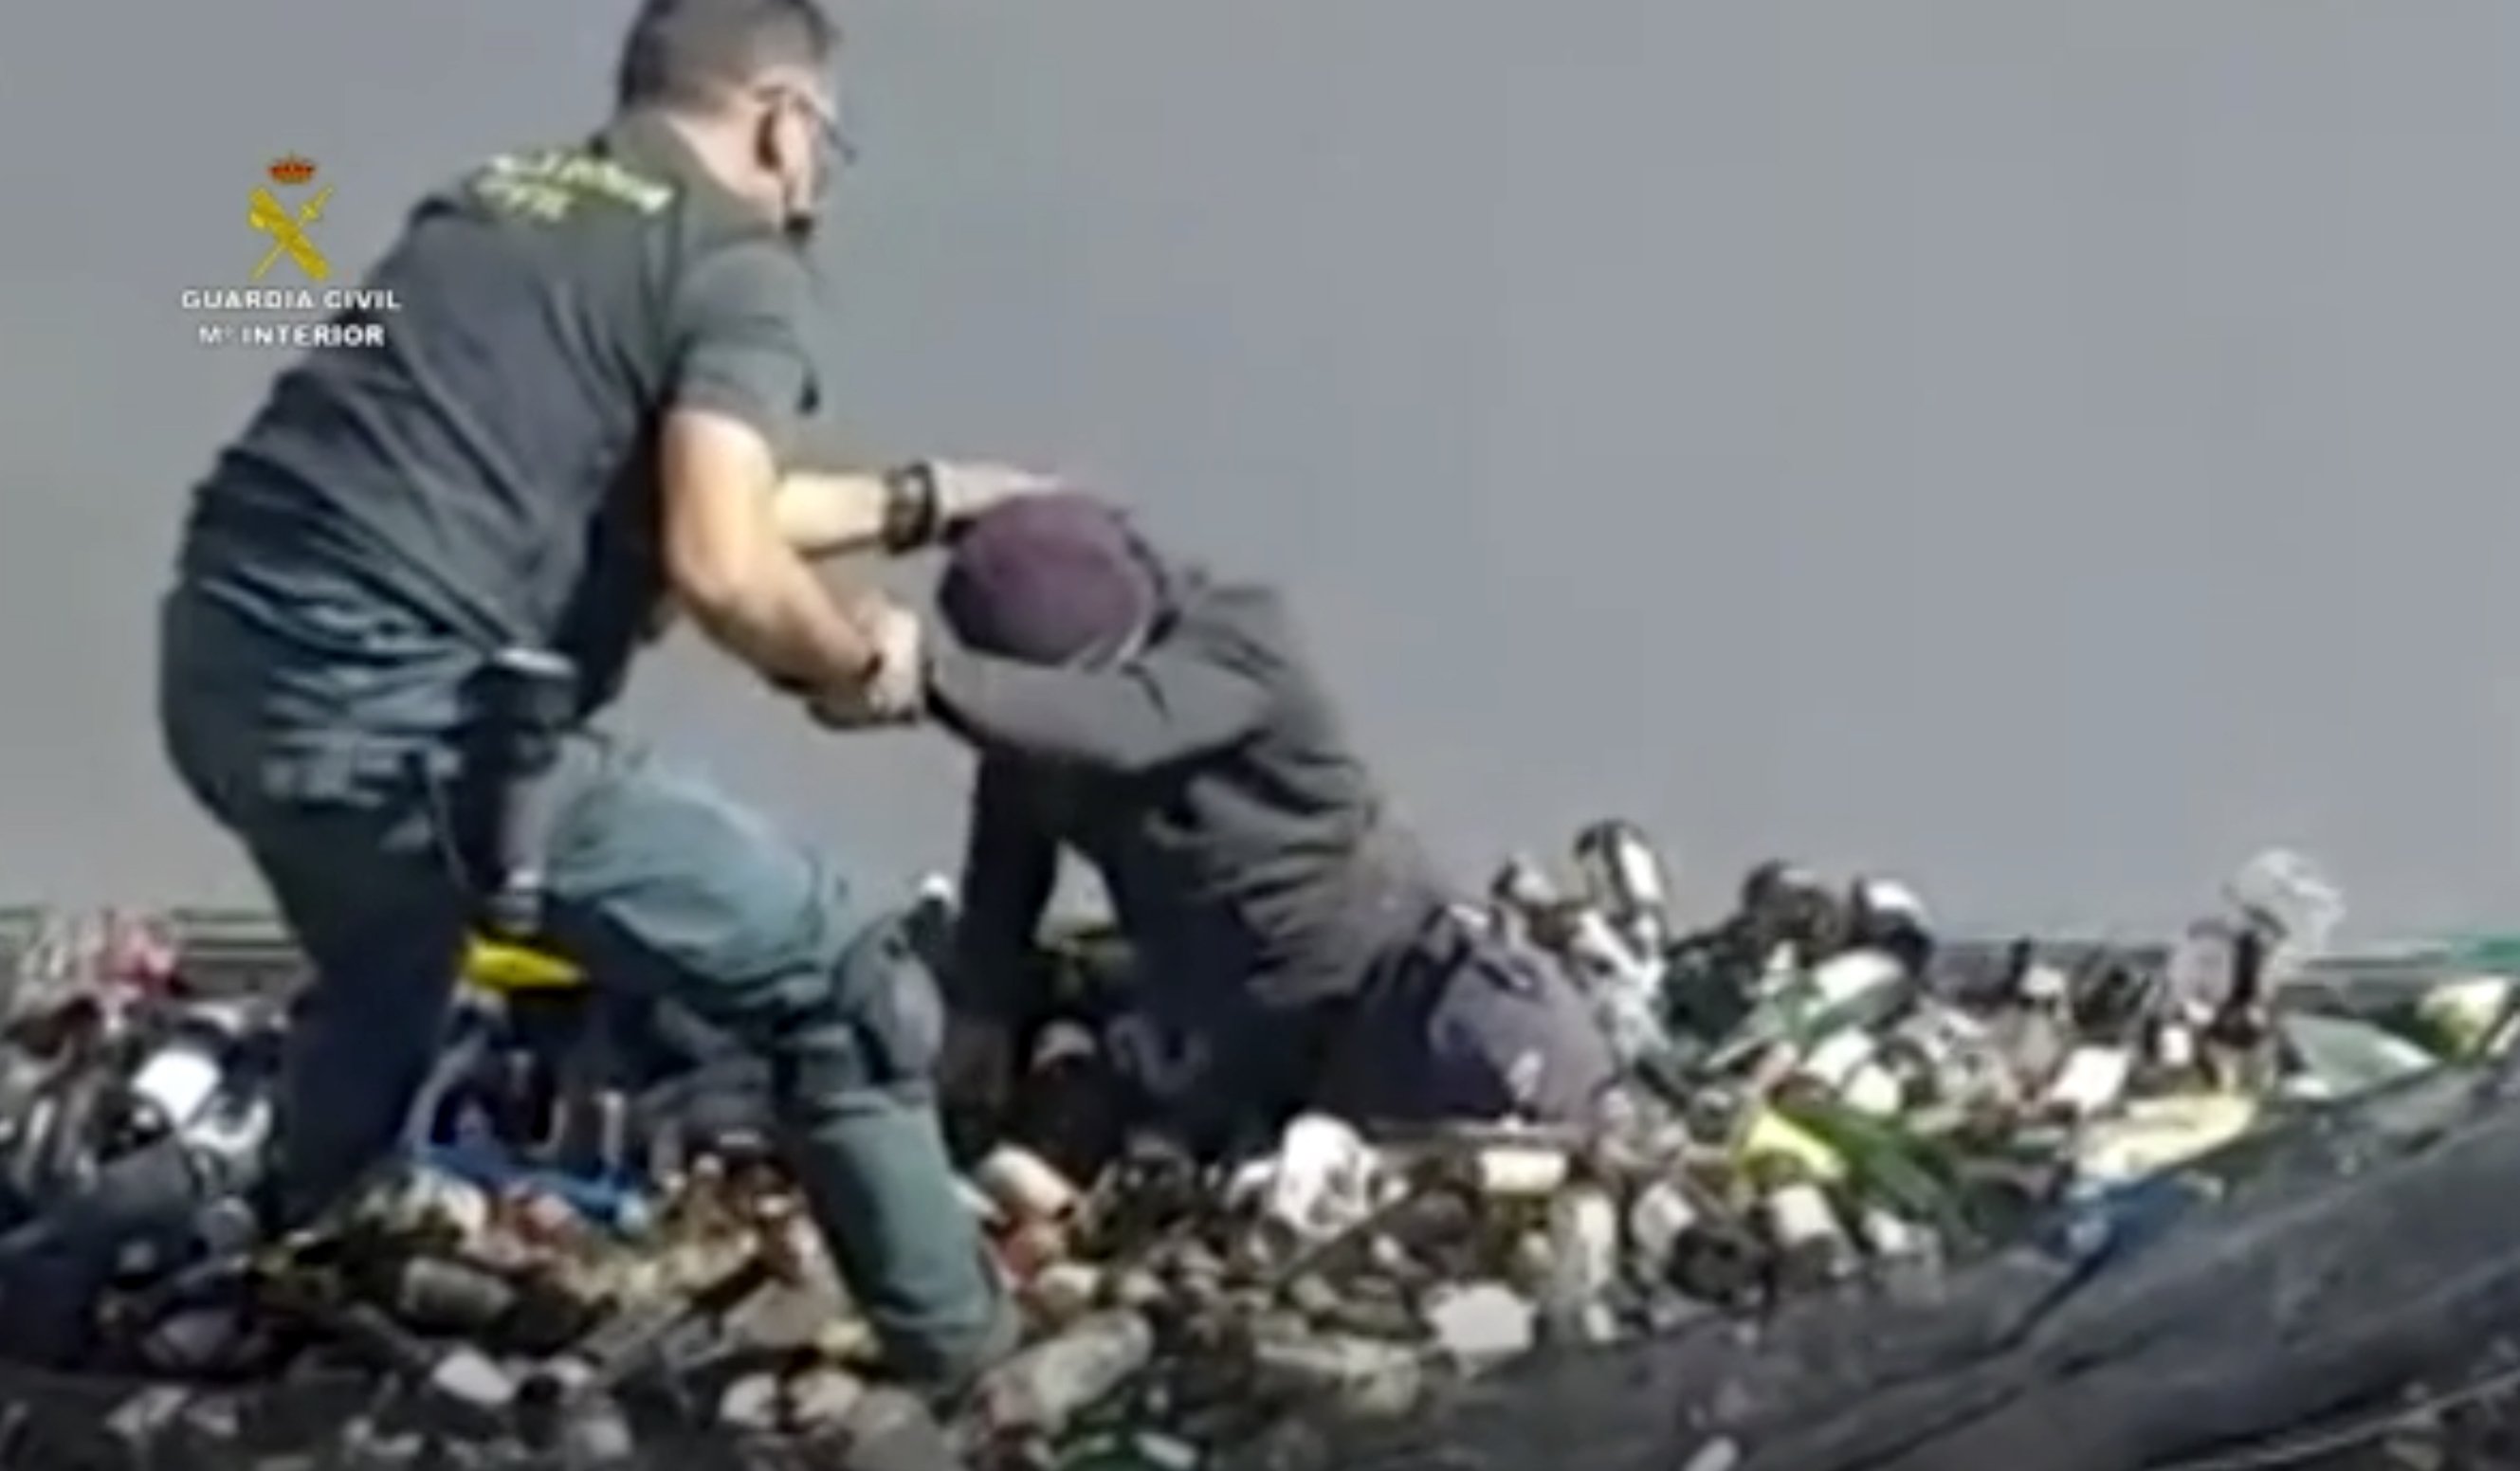 European migrants found it in the middle of broken glass and toxic ash